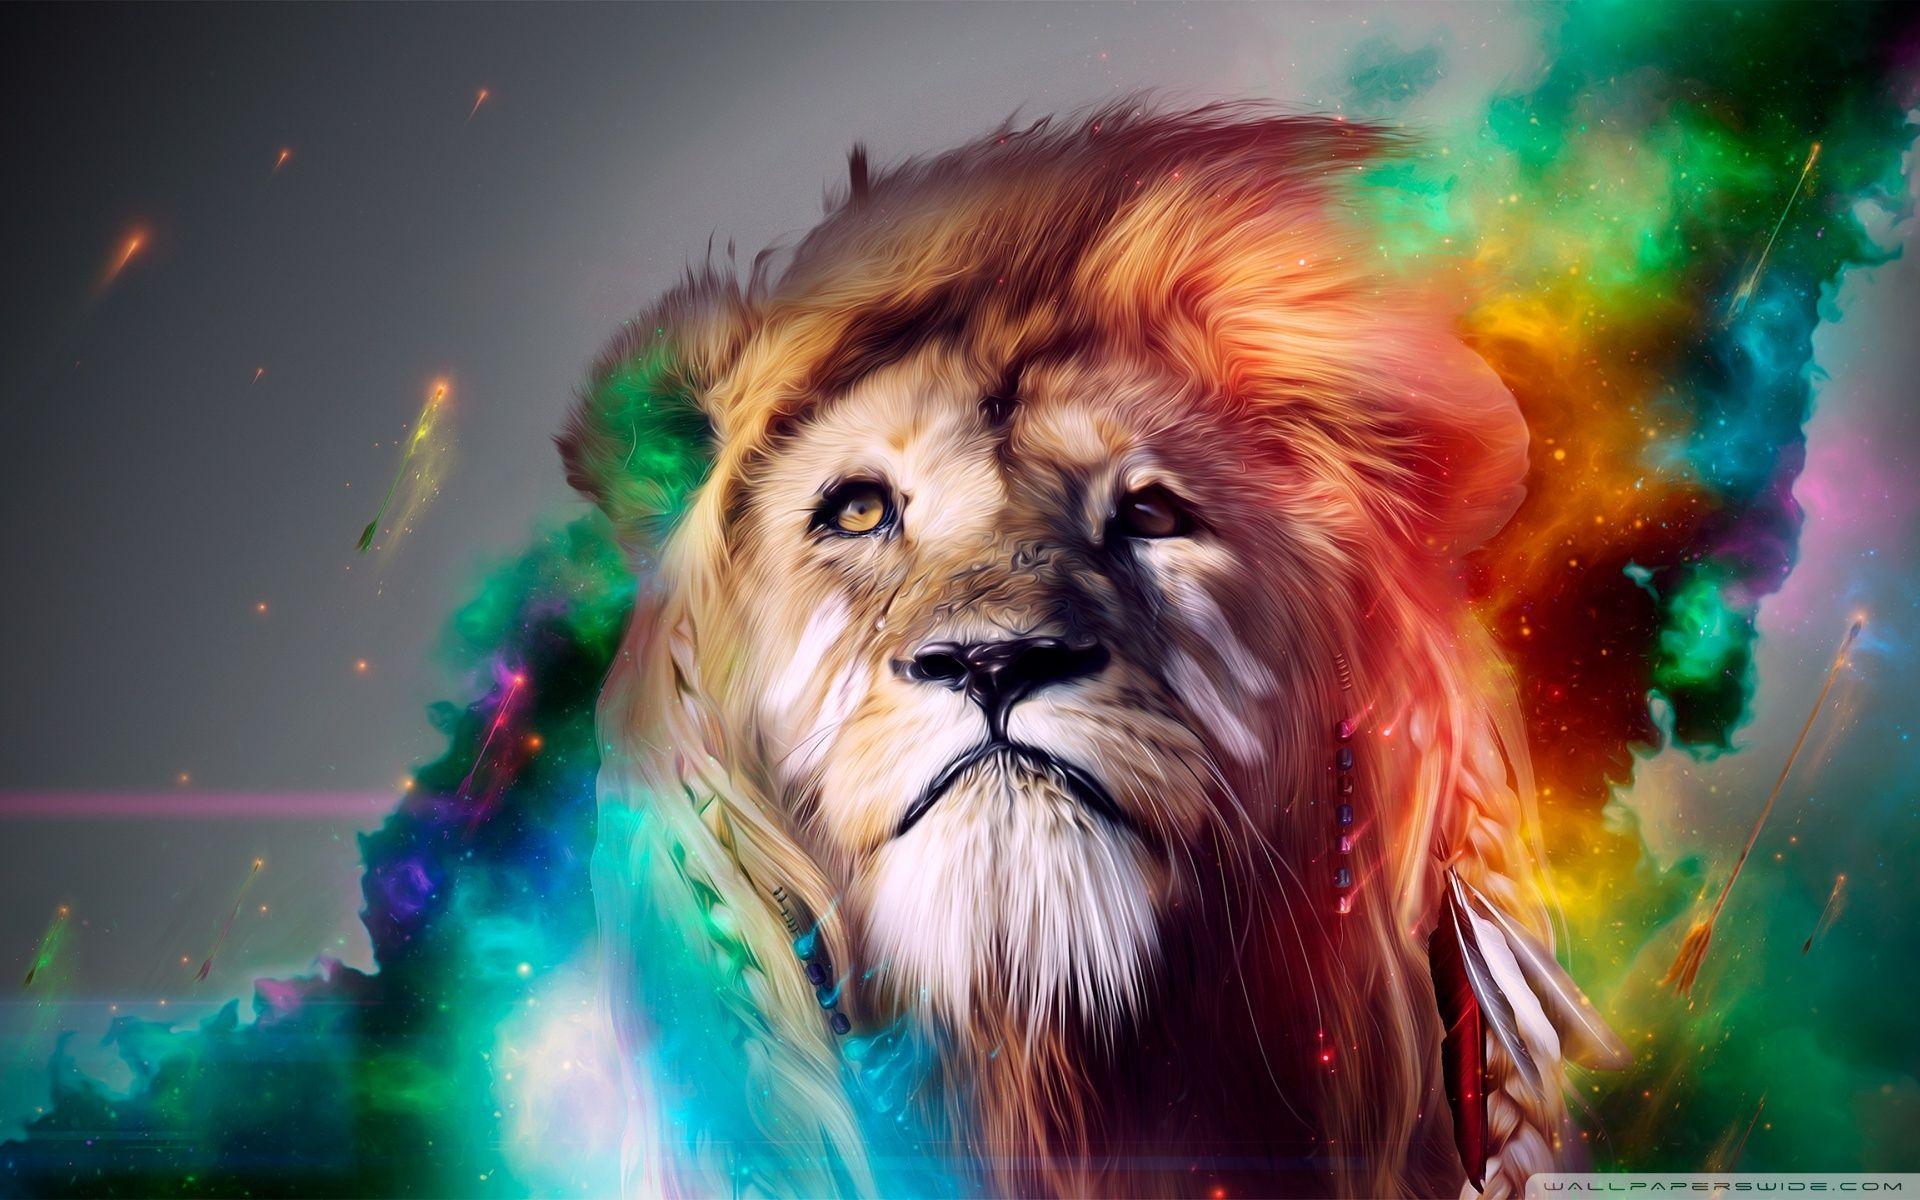 Lion Wallpaper Hd For Mobile Free Download